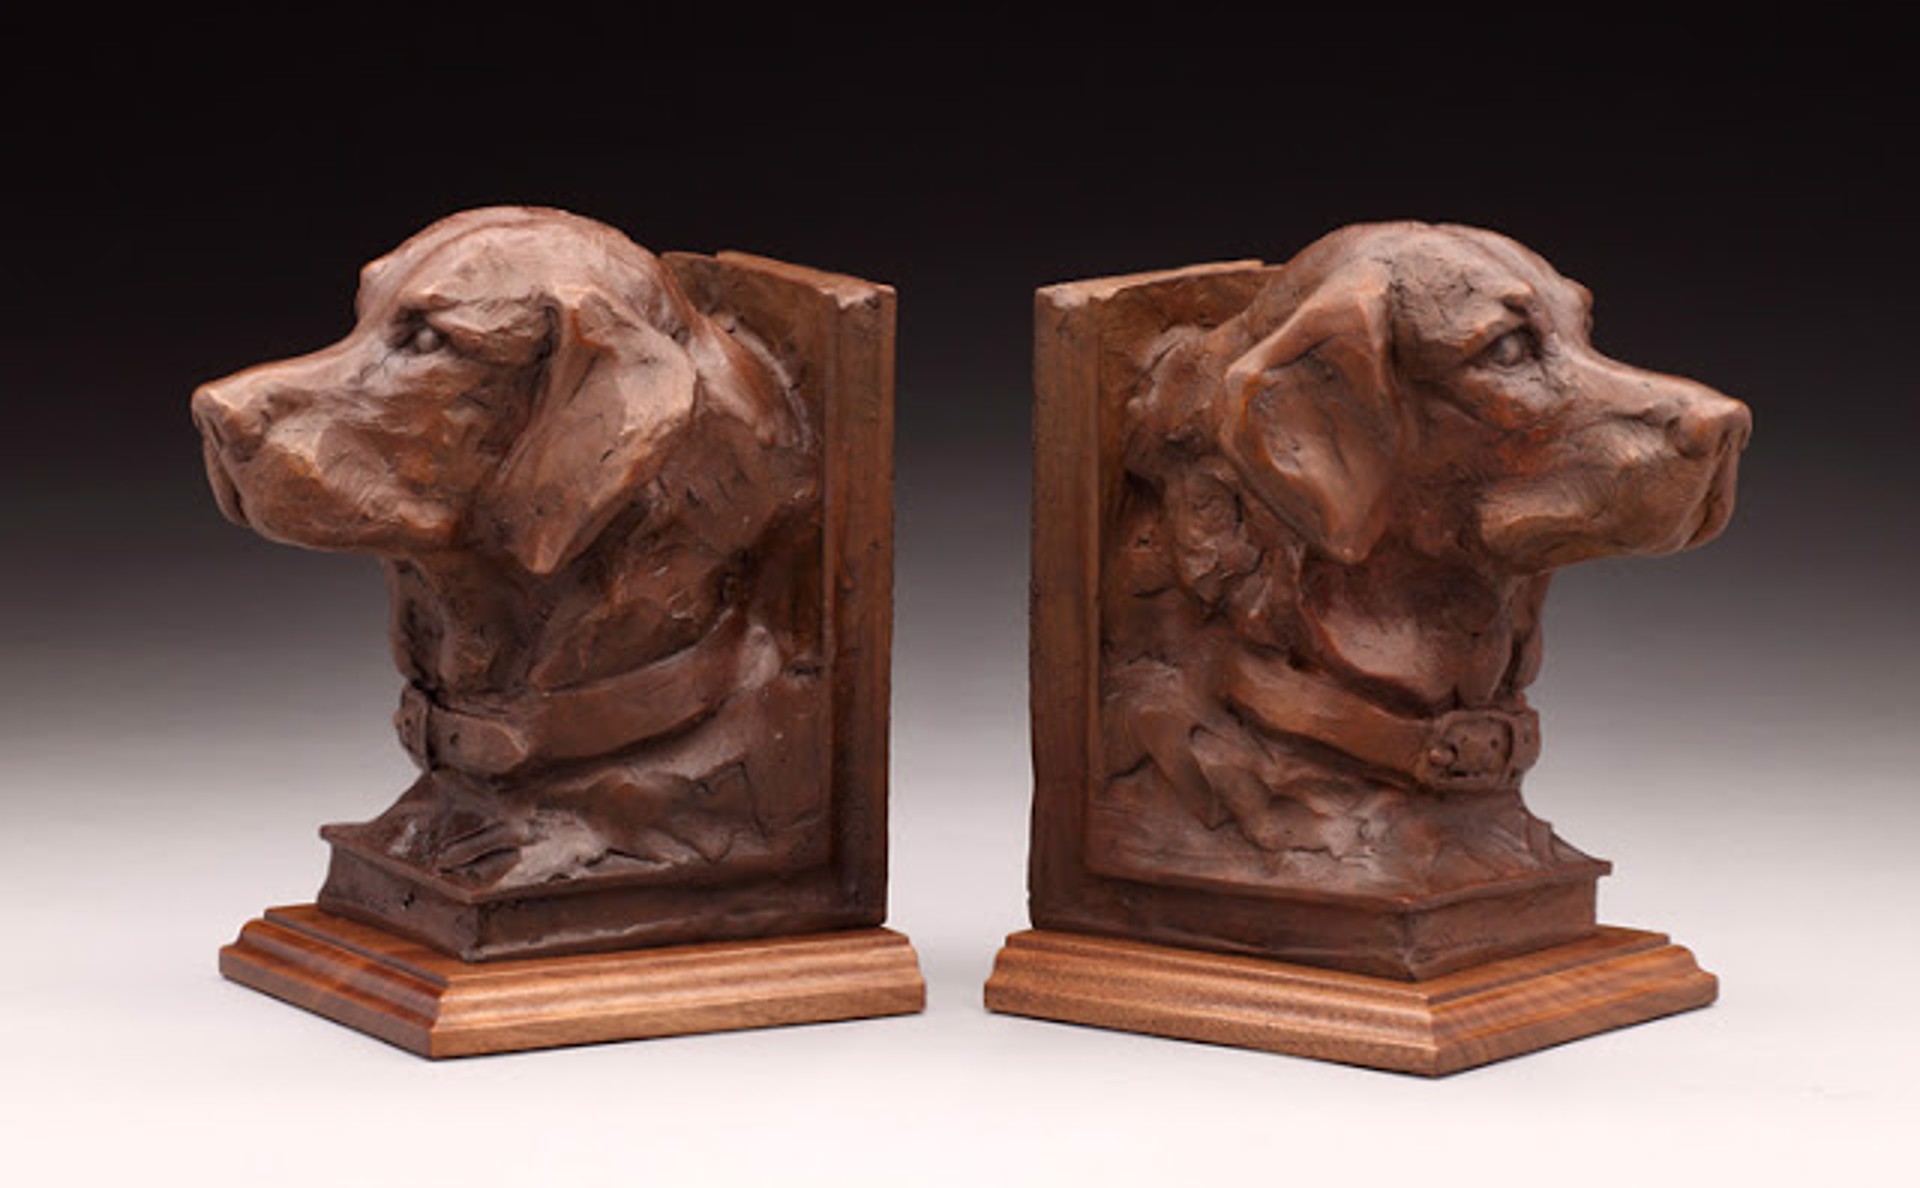 Lab Bookends by Sandy Scott